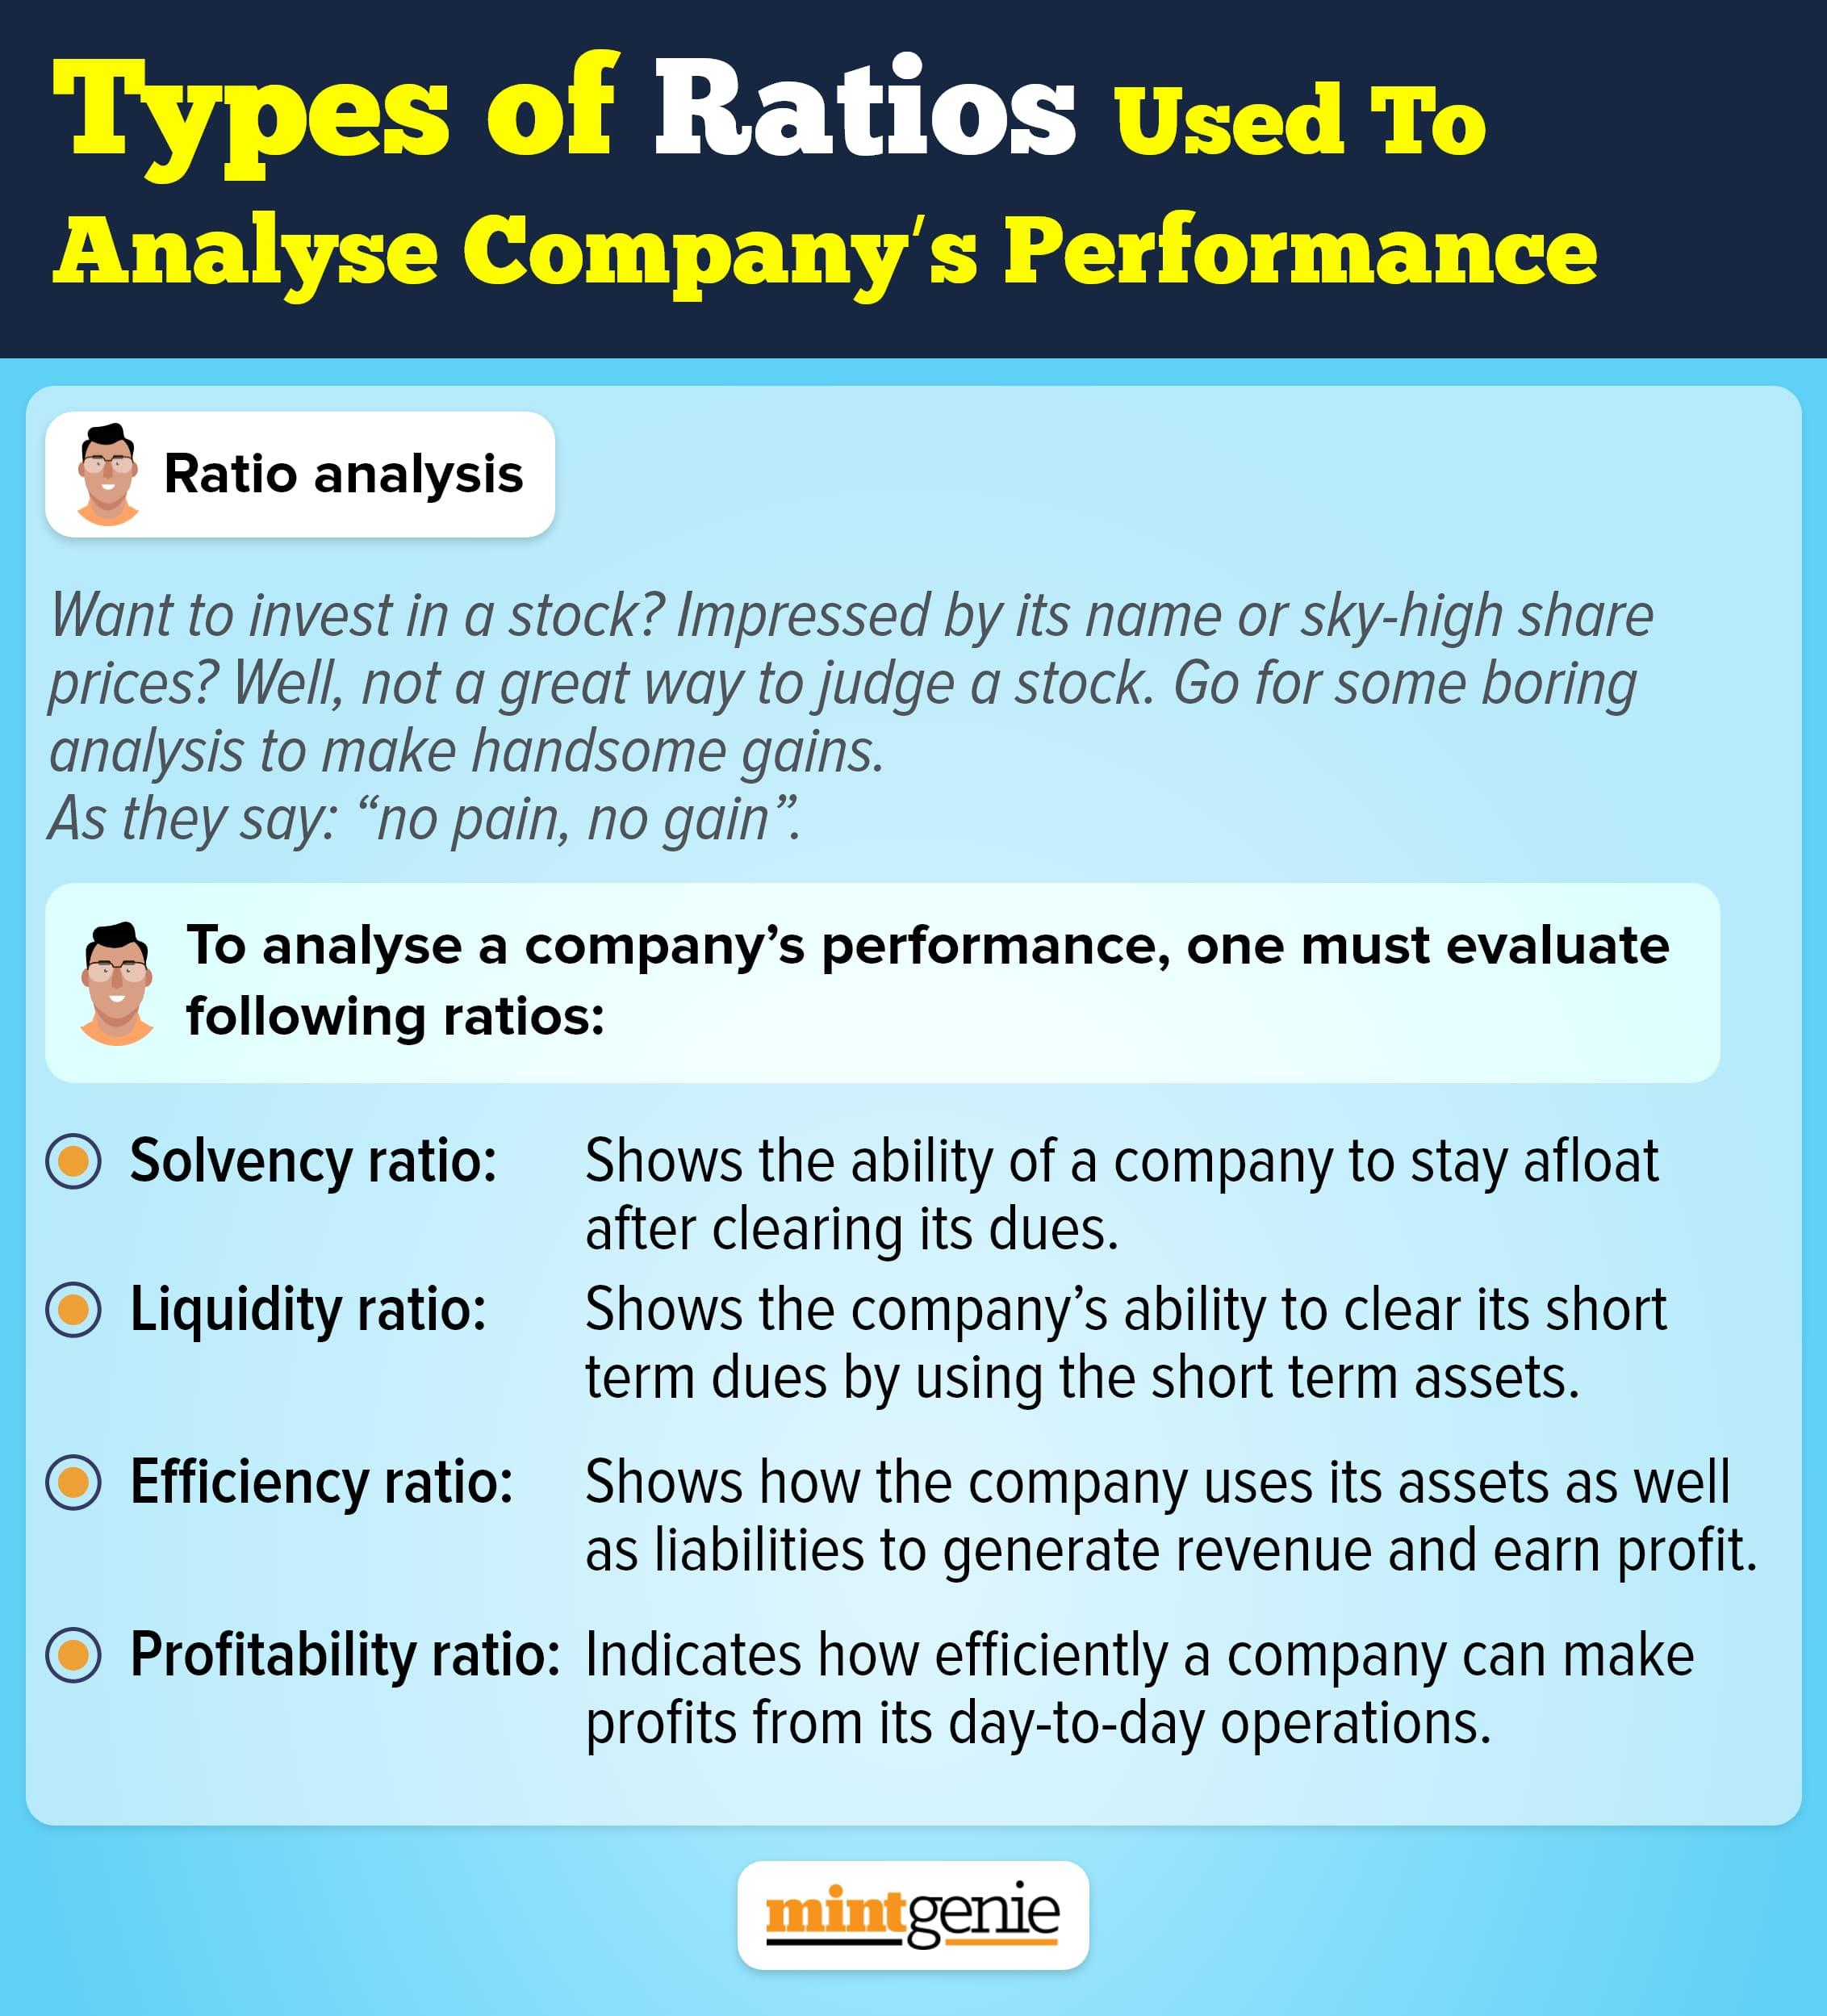 Types of ratios used to analyse company's performance